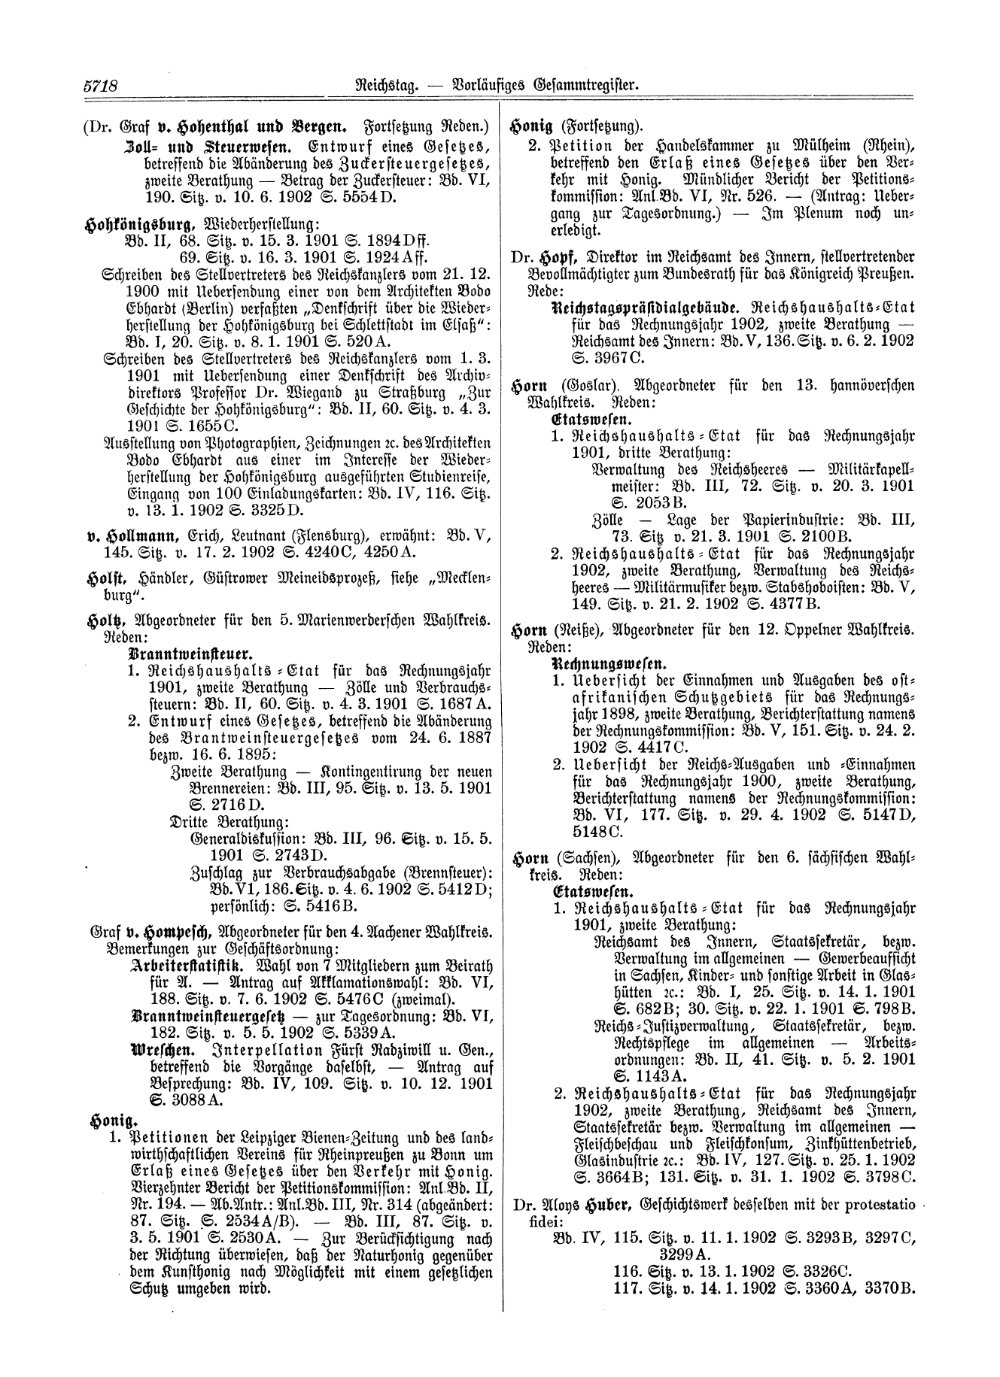 Scan of page 5718